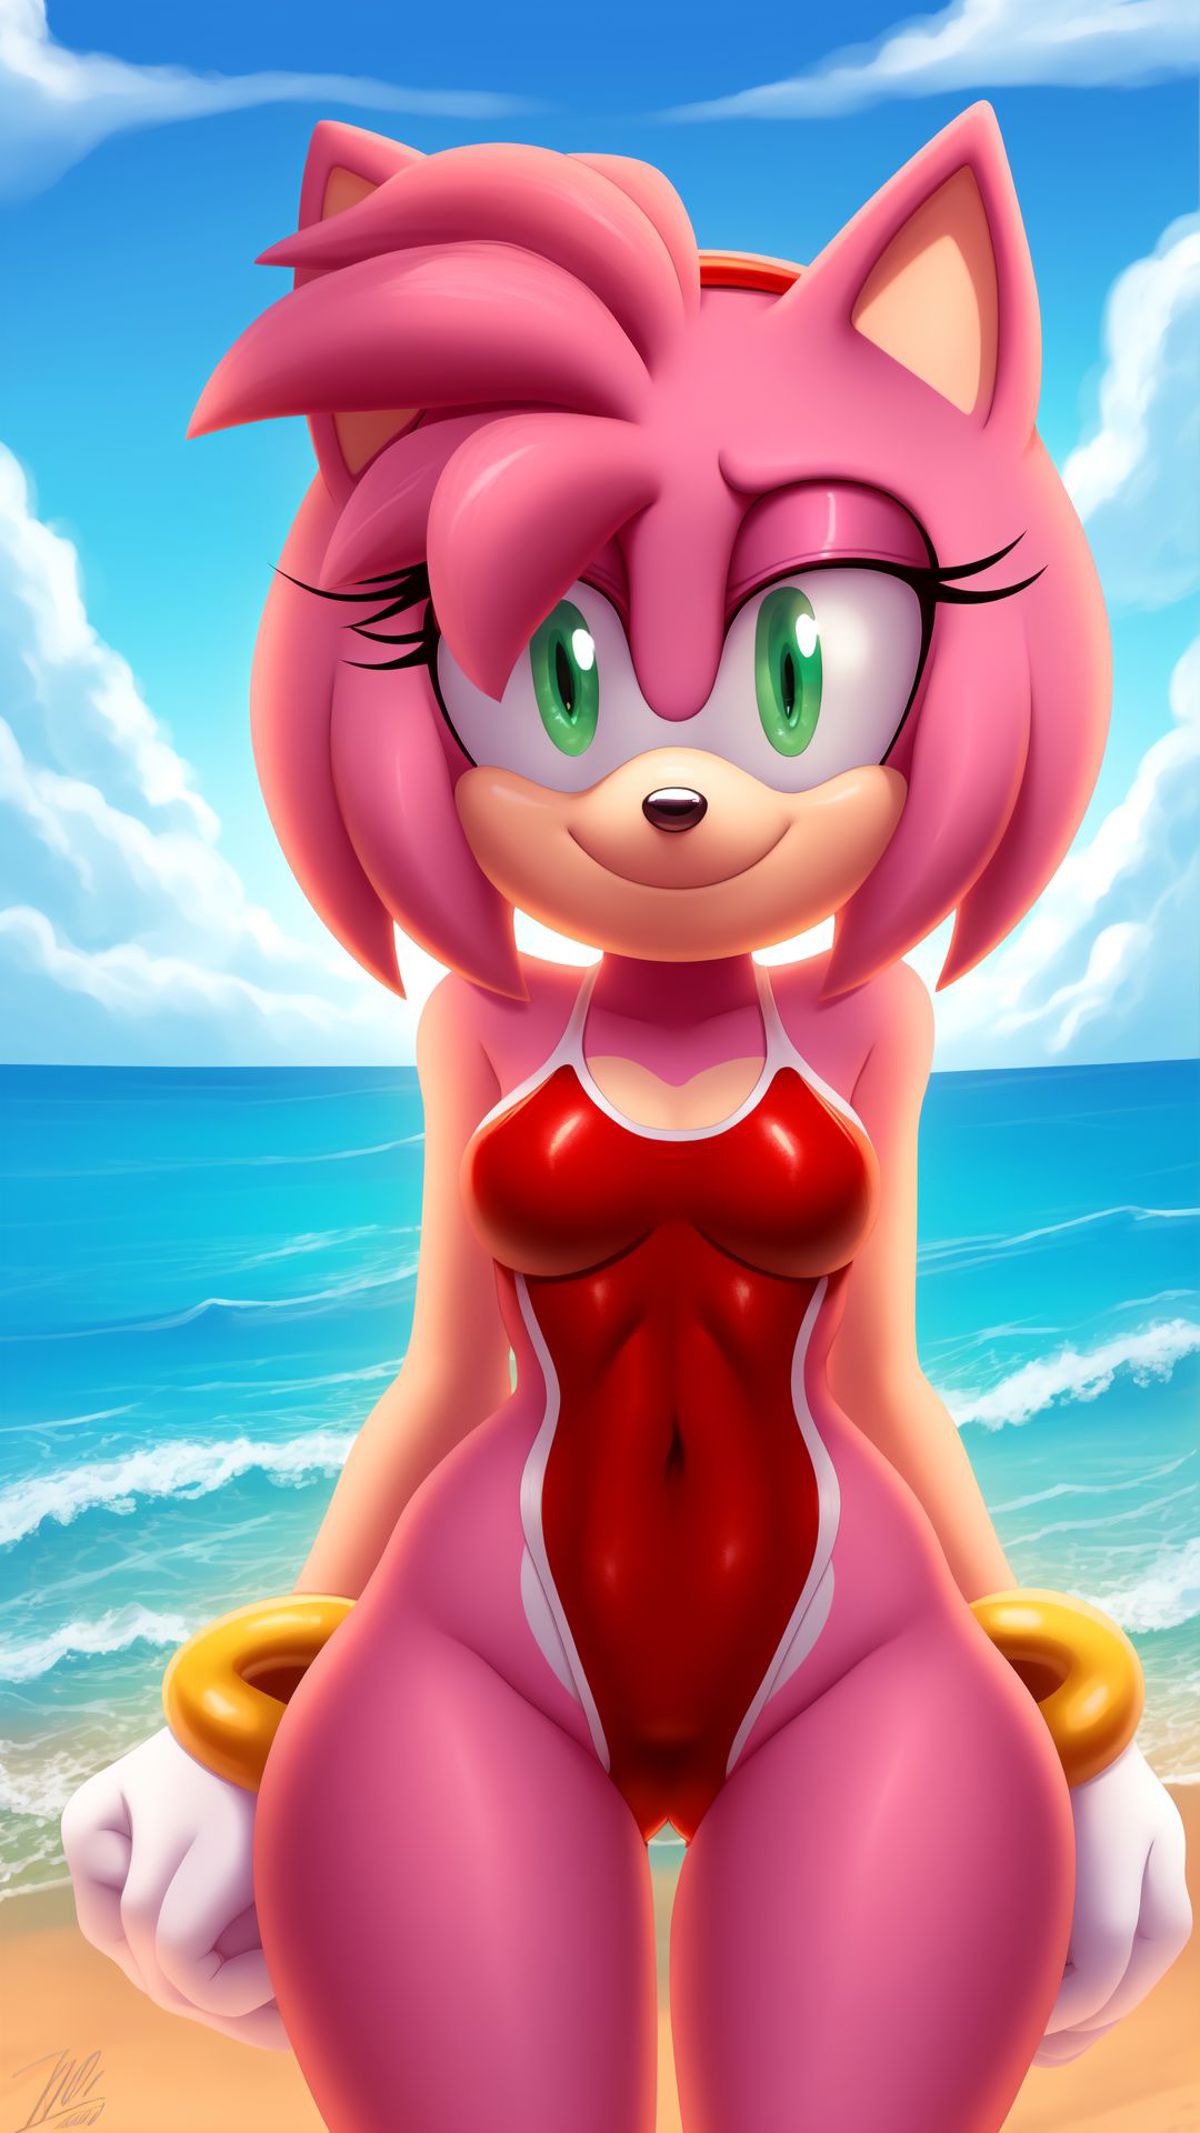 Amy Rose - Sonic image by marusame